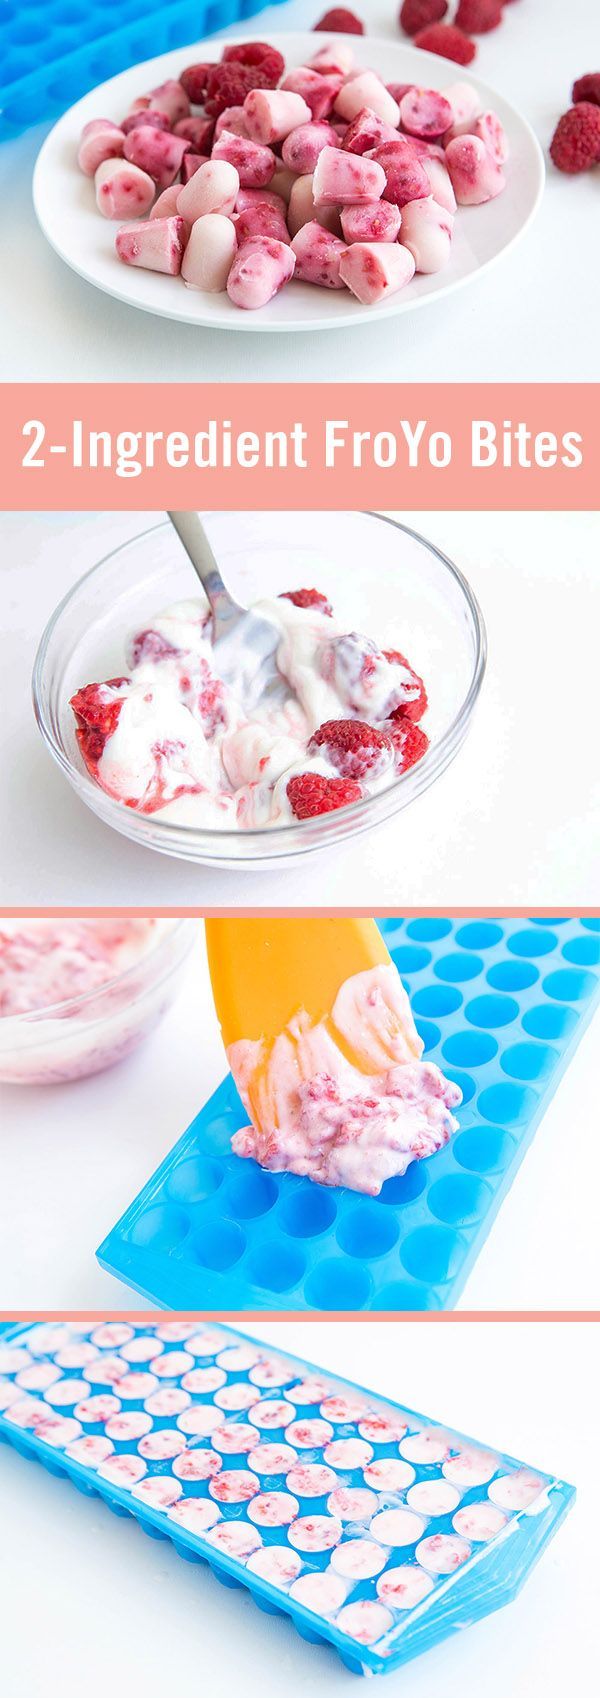 Looking for a guilt-free dessert? This 2-ingredient recipe for FroYo Bites is exac